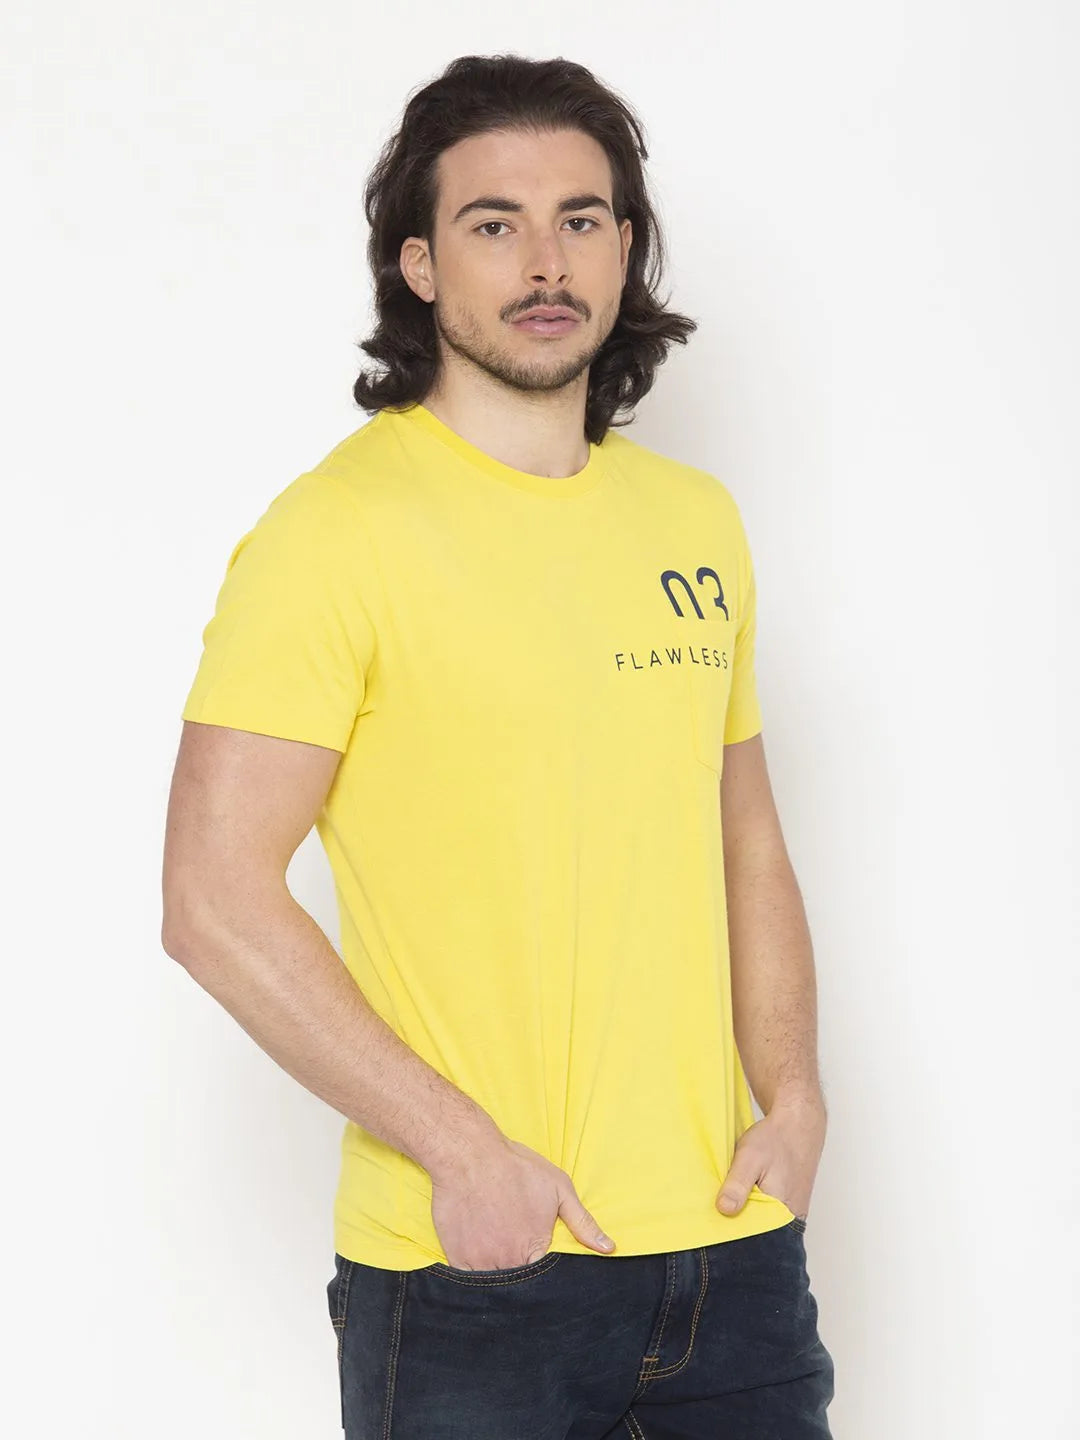 Flawless Men Yellow Cotton T-shirt Being Flawless